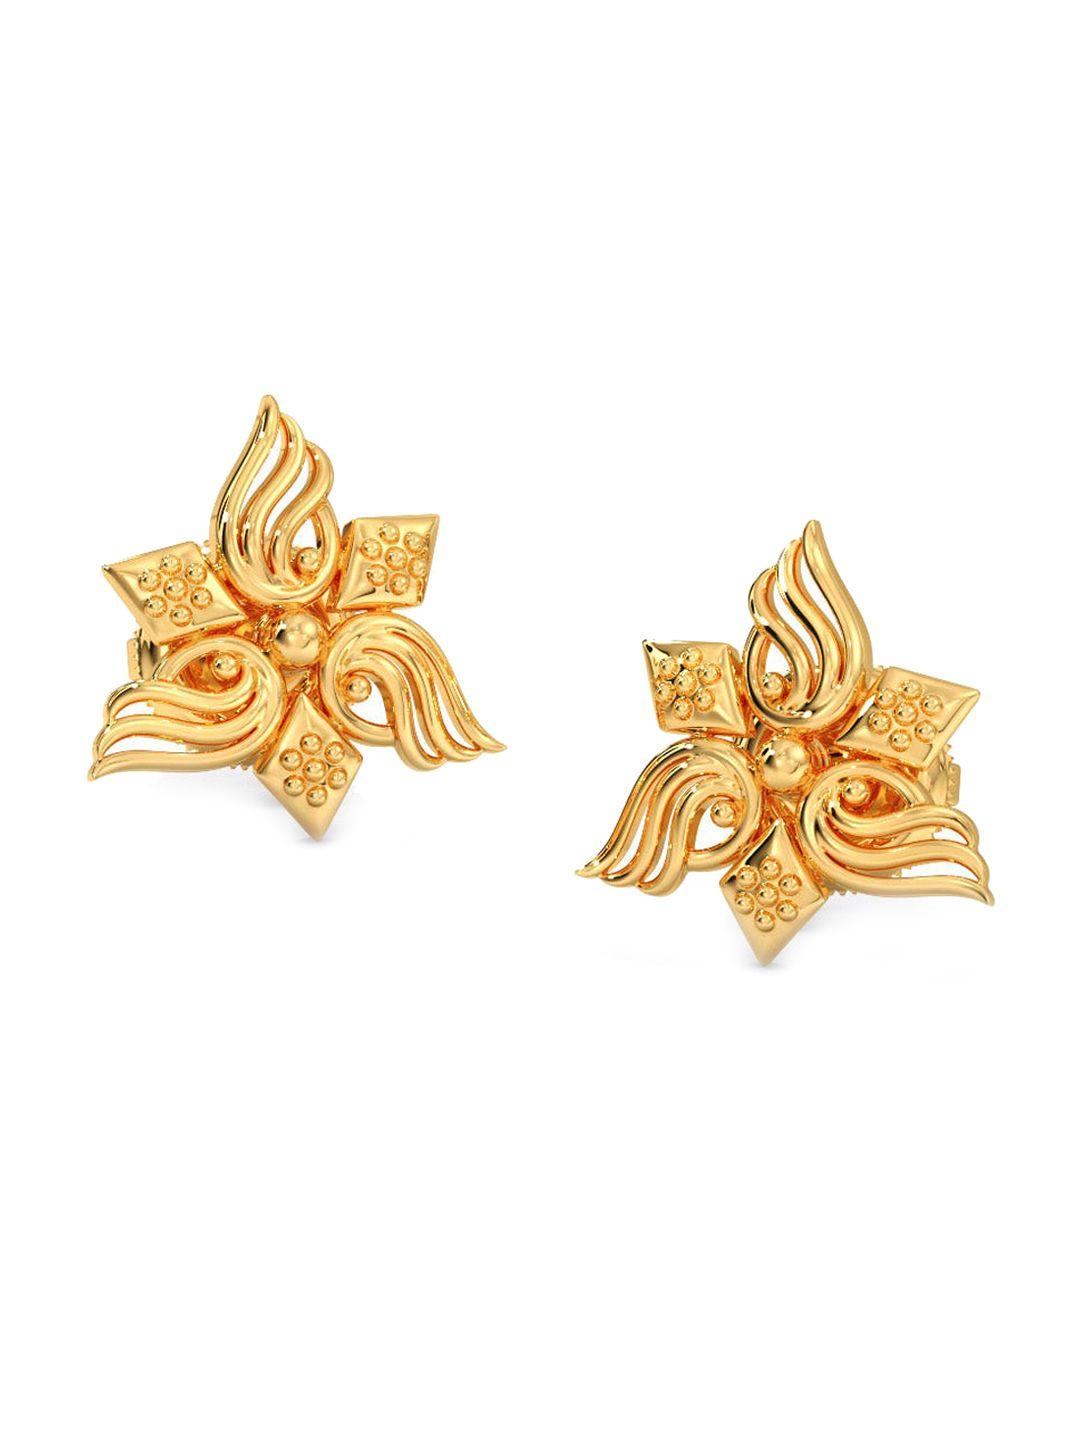 candere a kalyan jewellers company 18kt gold bis hallmark earrings-2.0gm